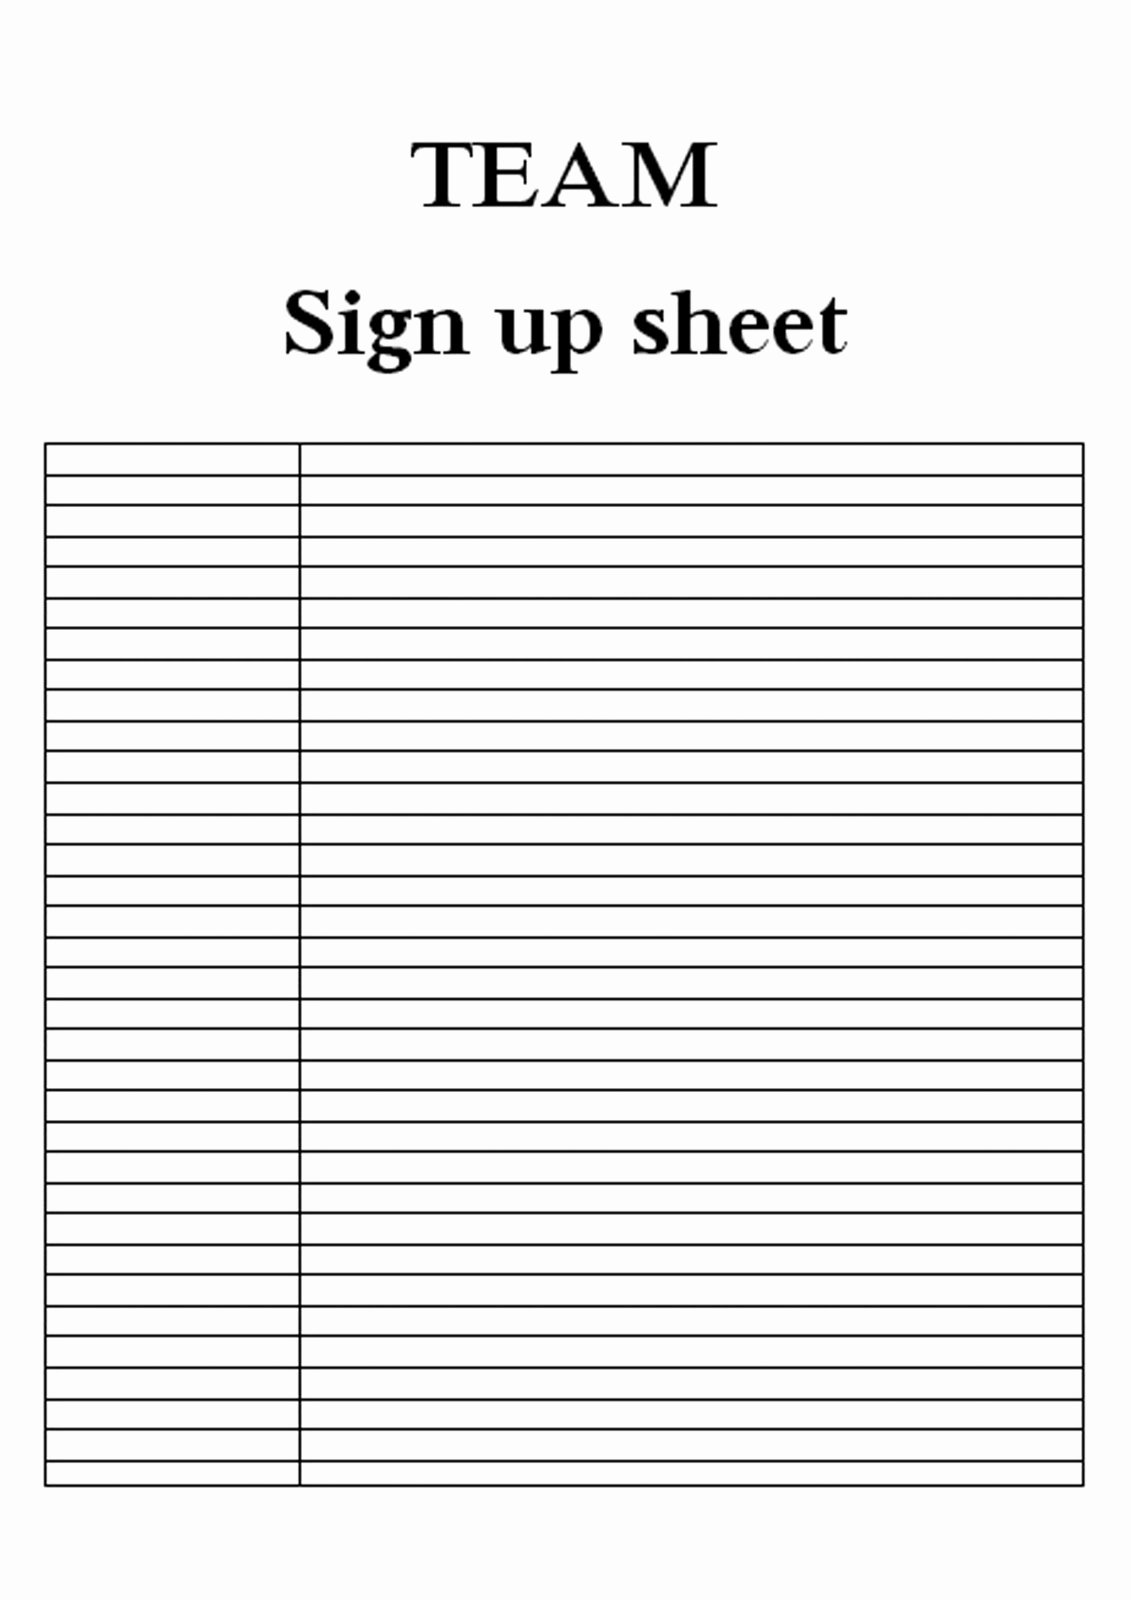 Sign Up Sheet Example Elegant Sign Up Sheet Word Templates Word Excel Pdf formats